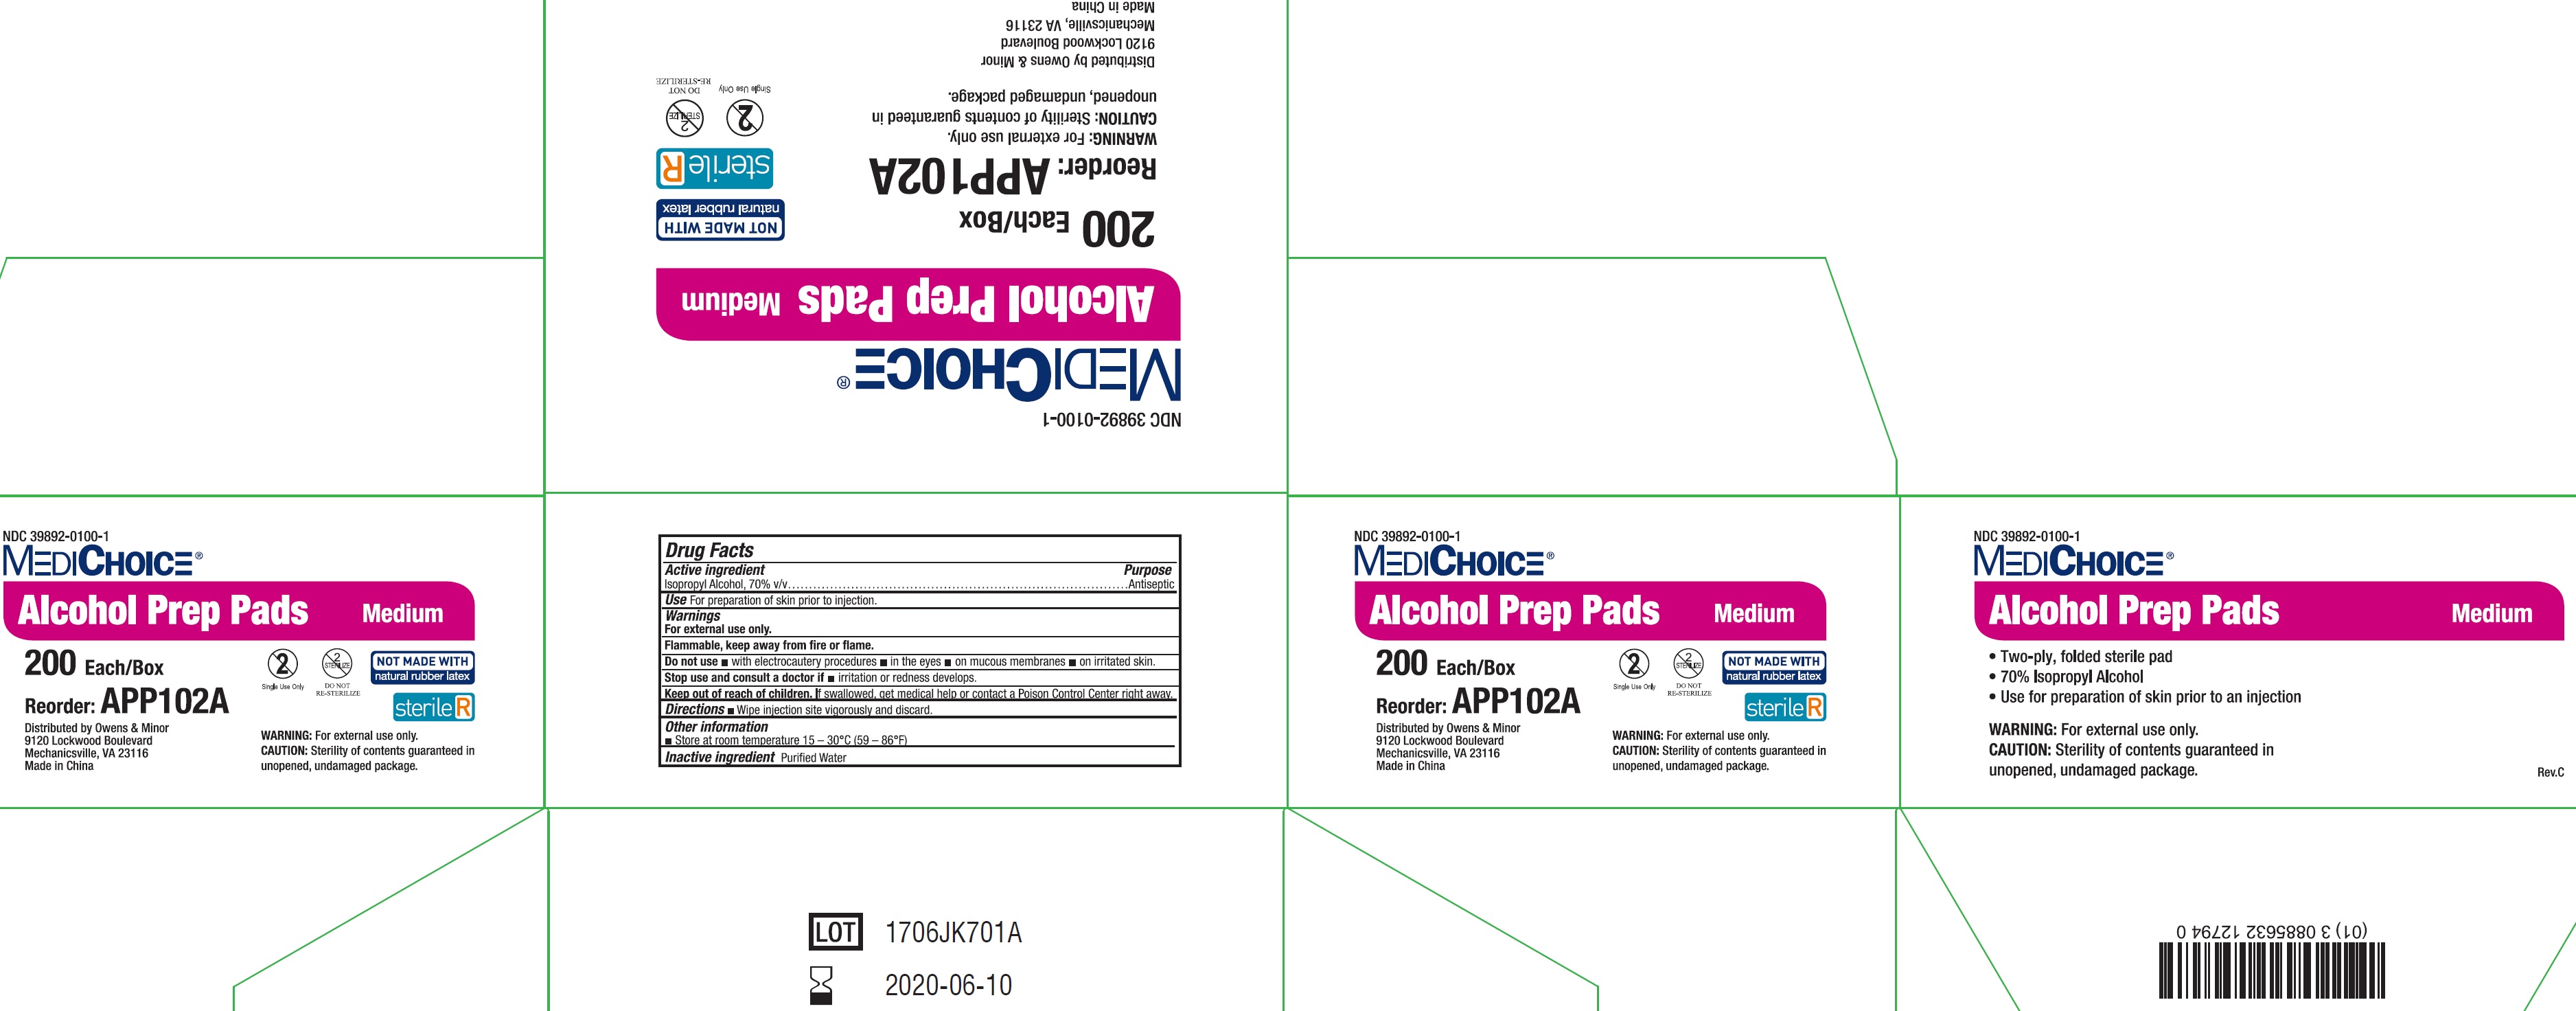 NDC - 39892-0100-1 - Alcohol Prep Pad - Outer Package1